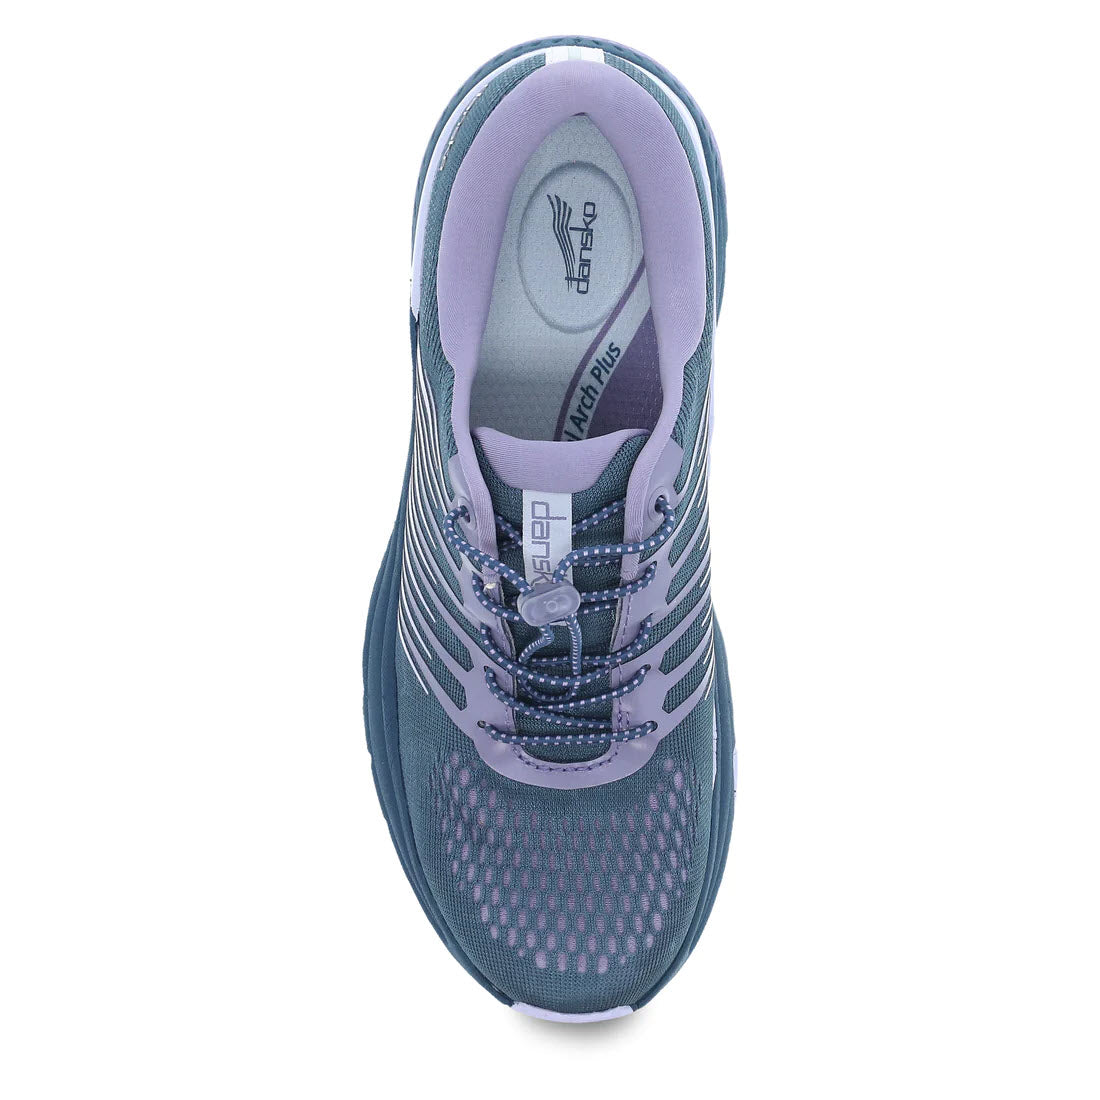 Top view of a pair of grey and blue Dansko Penni Denim Mesh - Womens Natural Arch Plus performance walking sneakers on a white background.